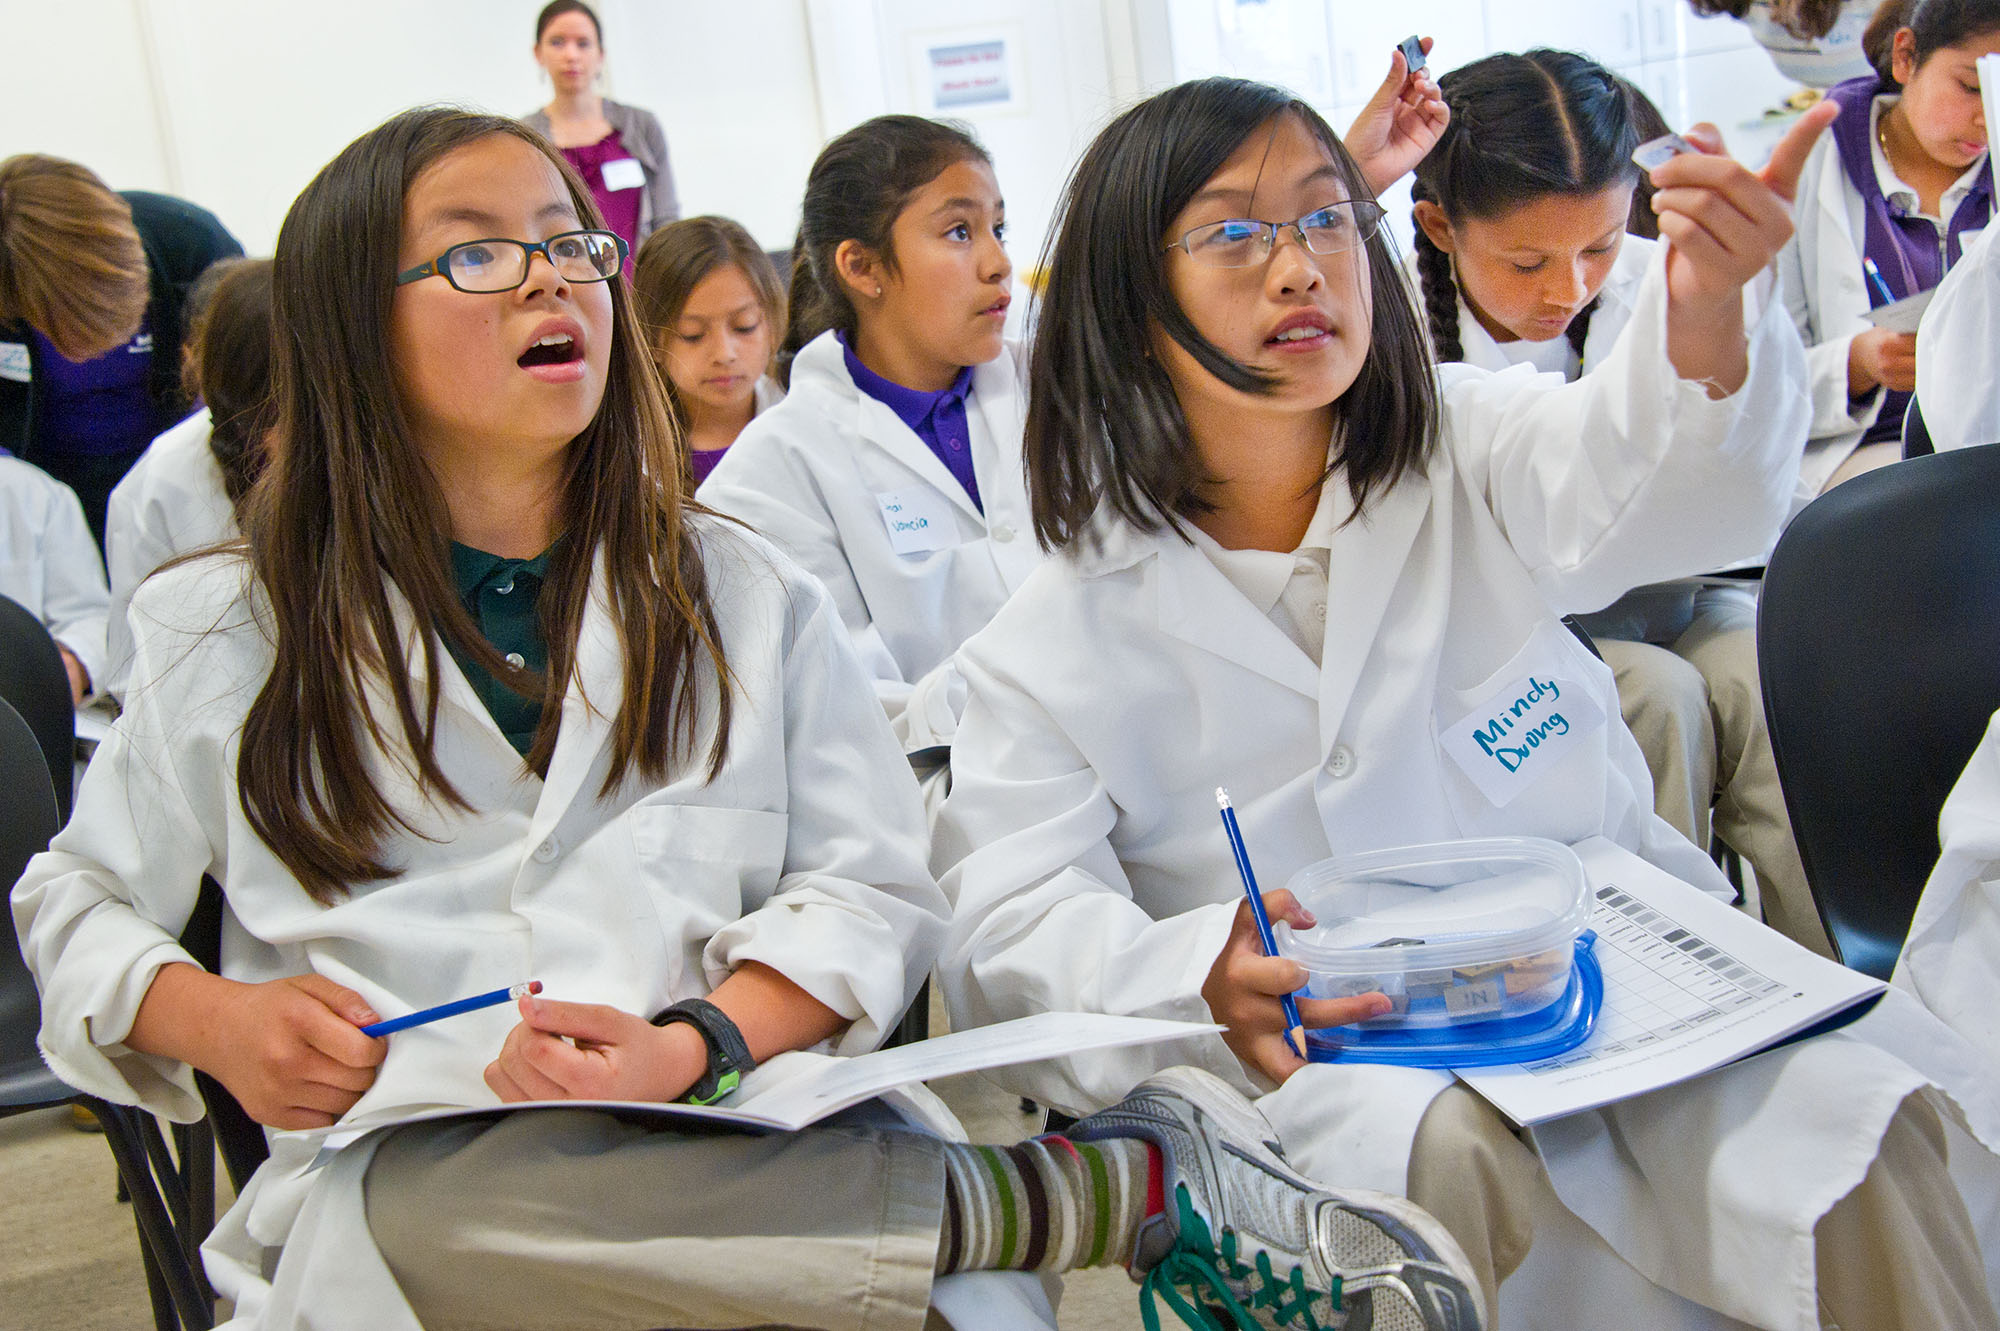 Students in lab coats listen to a presentation.